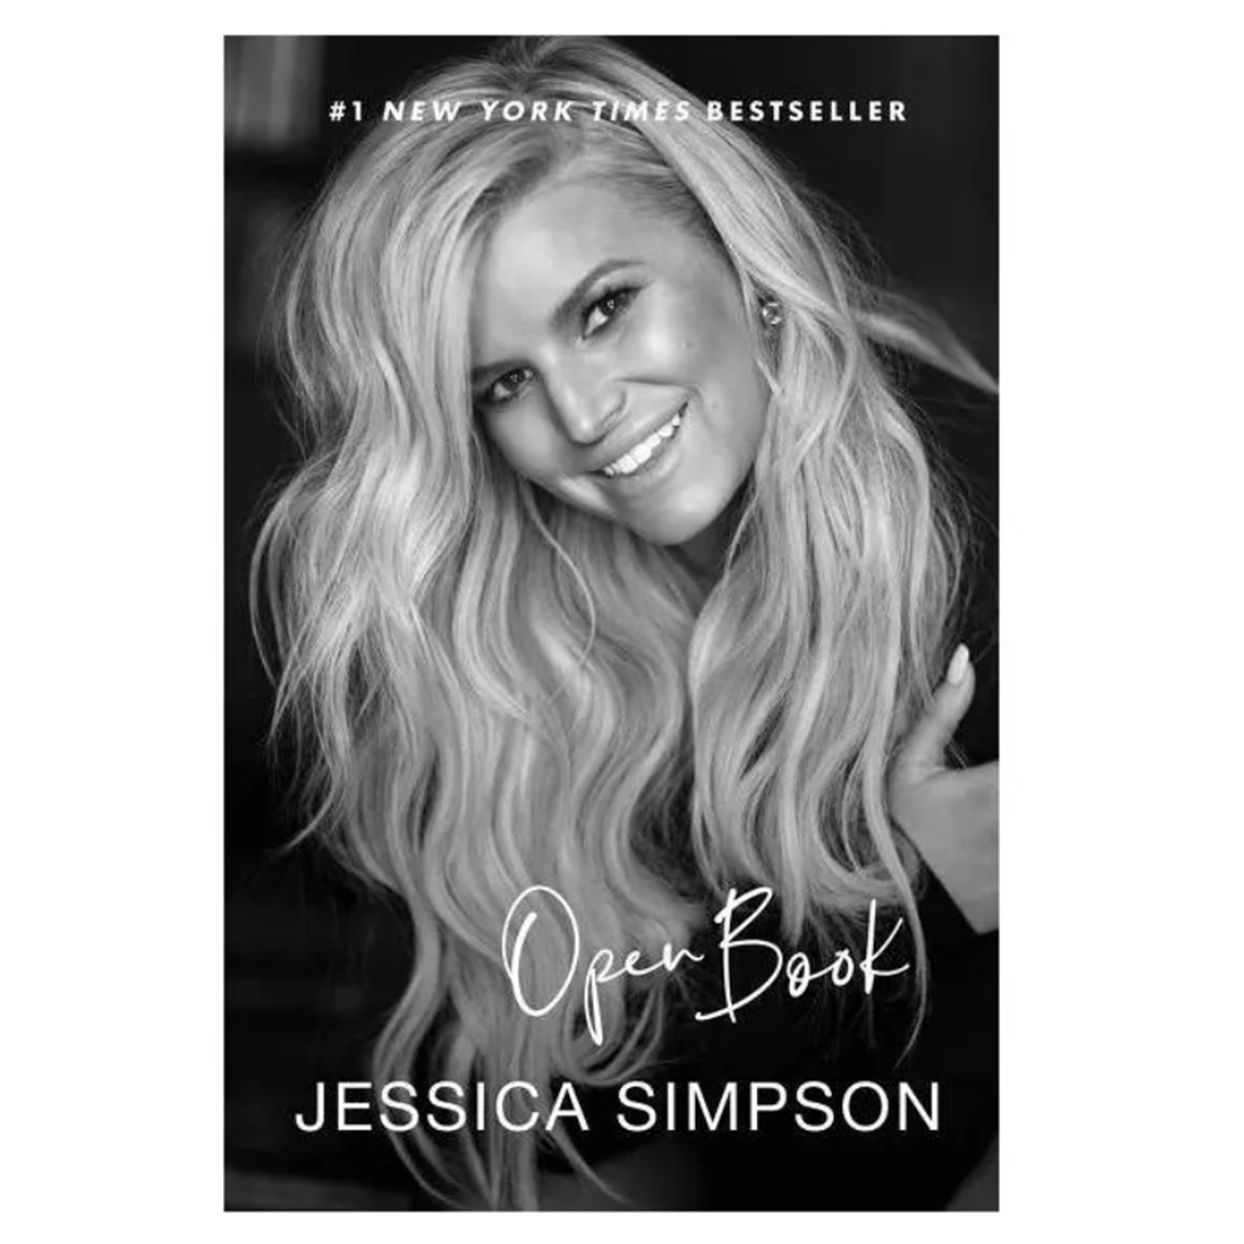 A cover shot of "Open Book" by Jessica Simpson